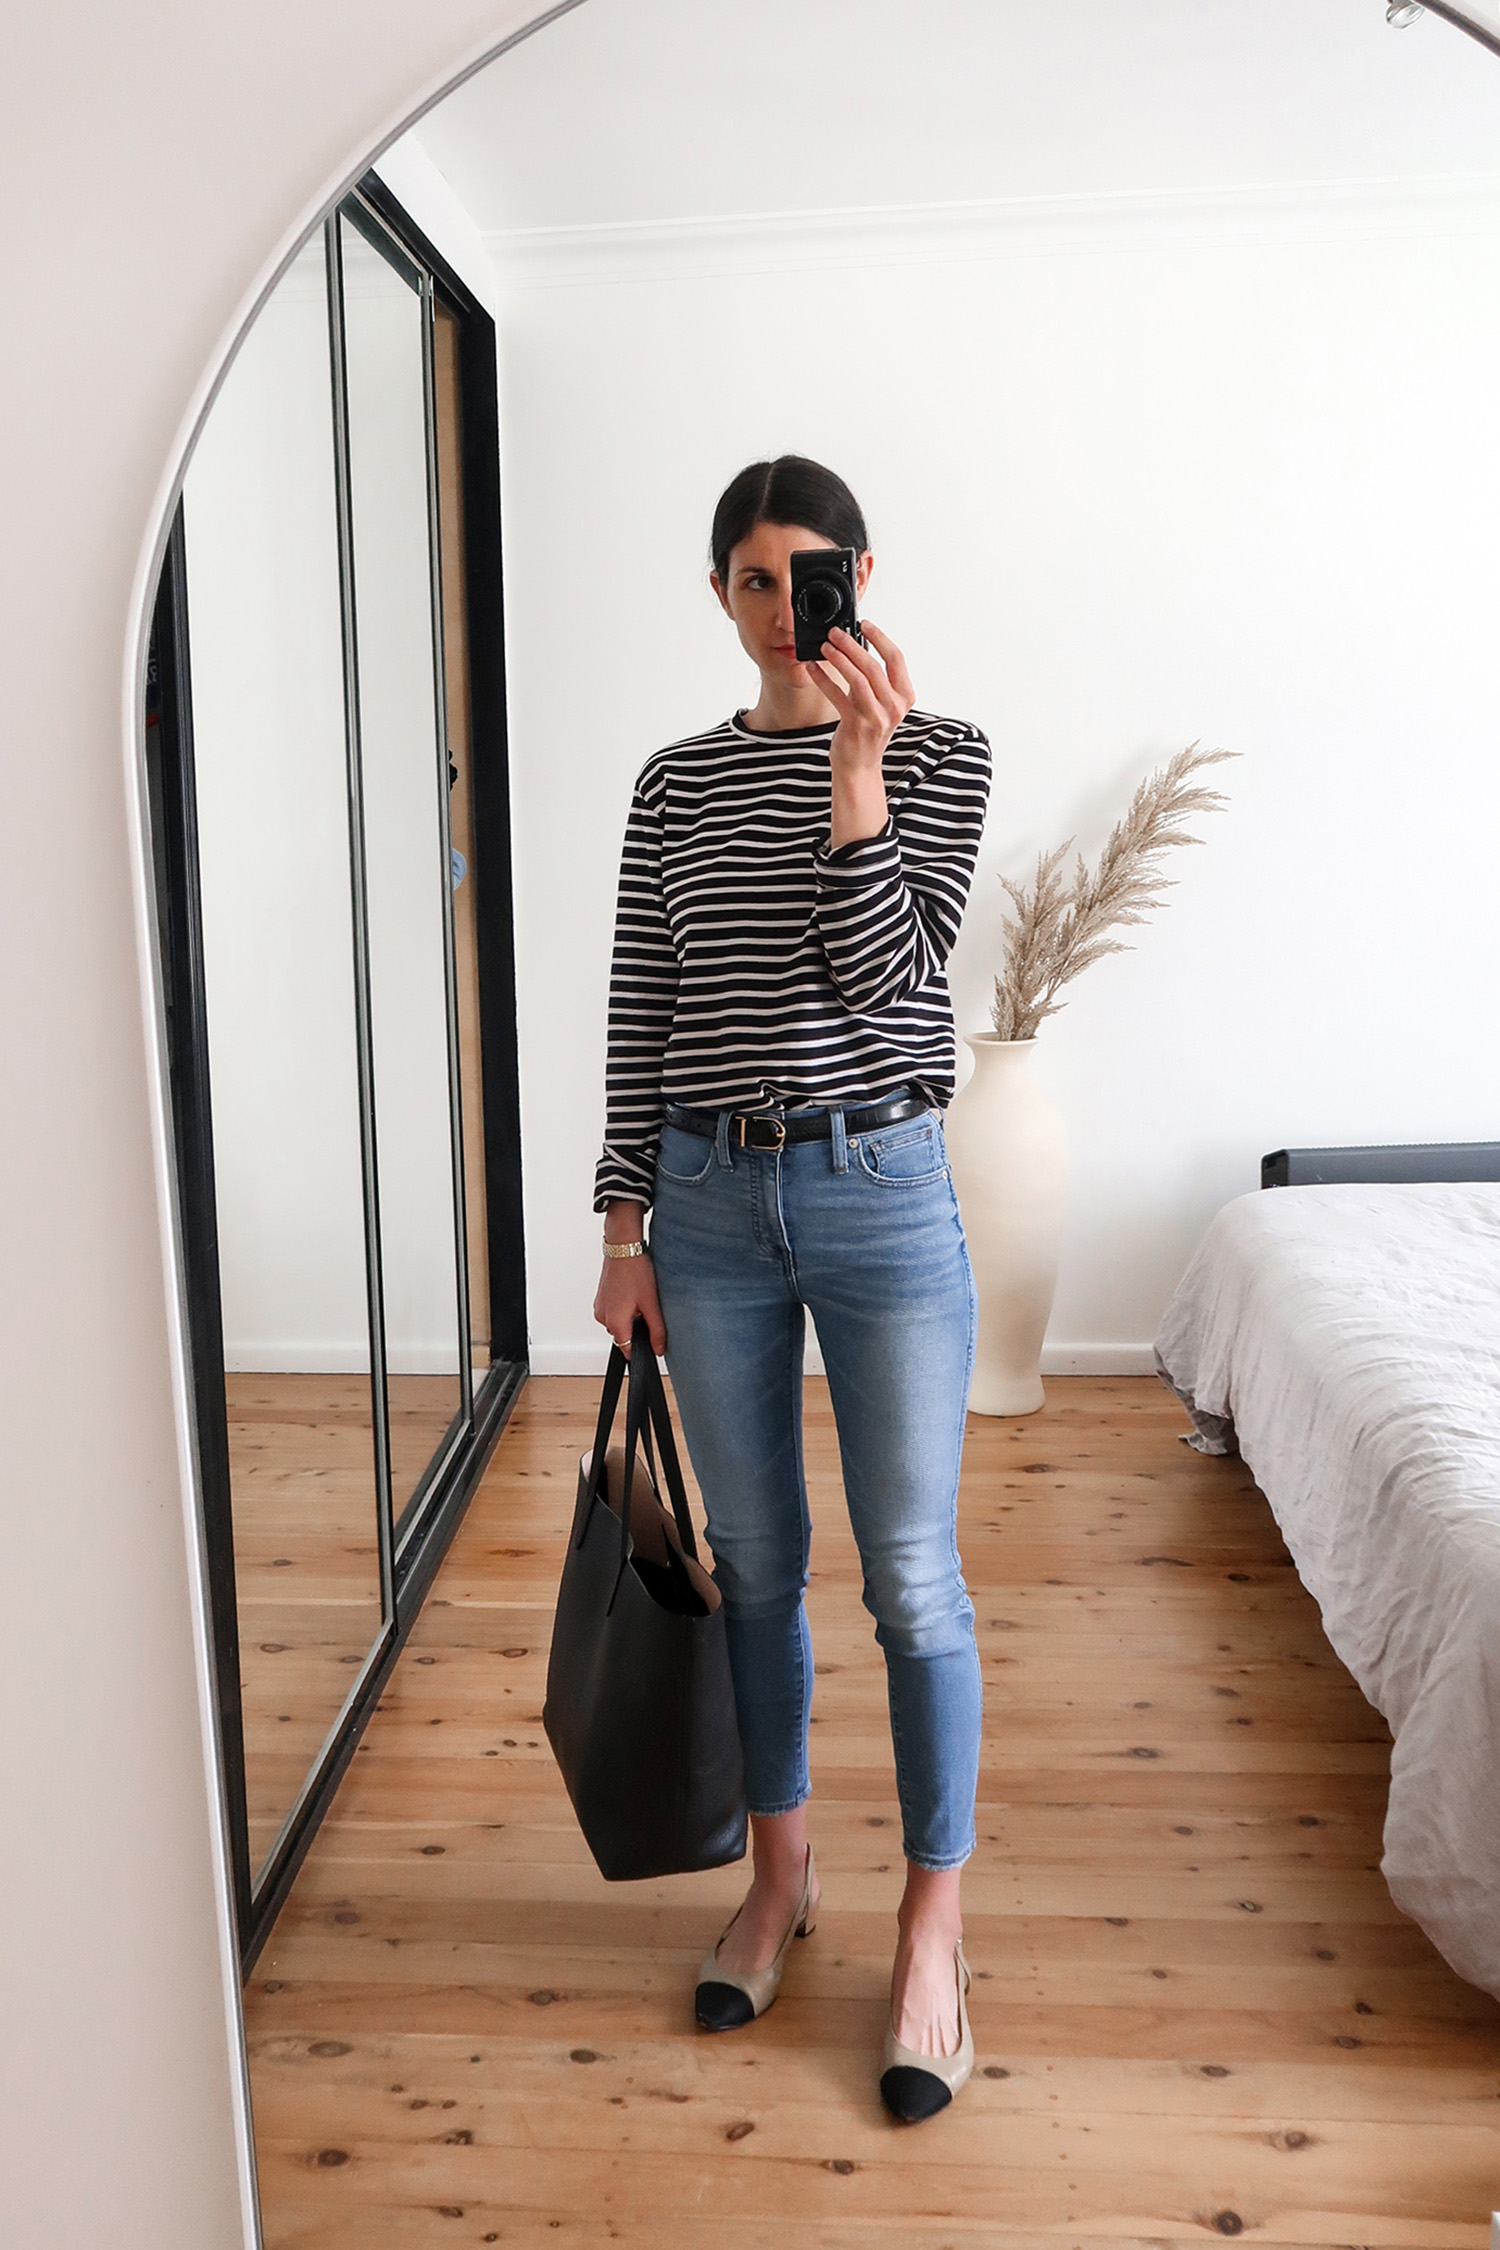 Items I Own Nordstrom Anniversary Sale Madewell Skinny Crop Jeans